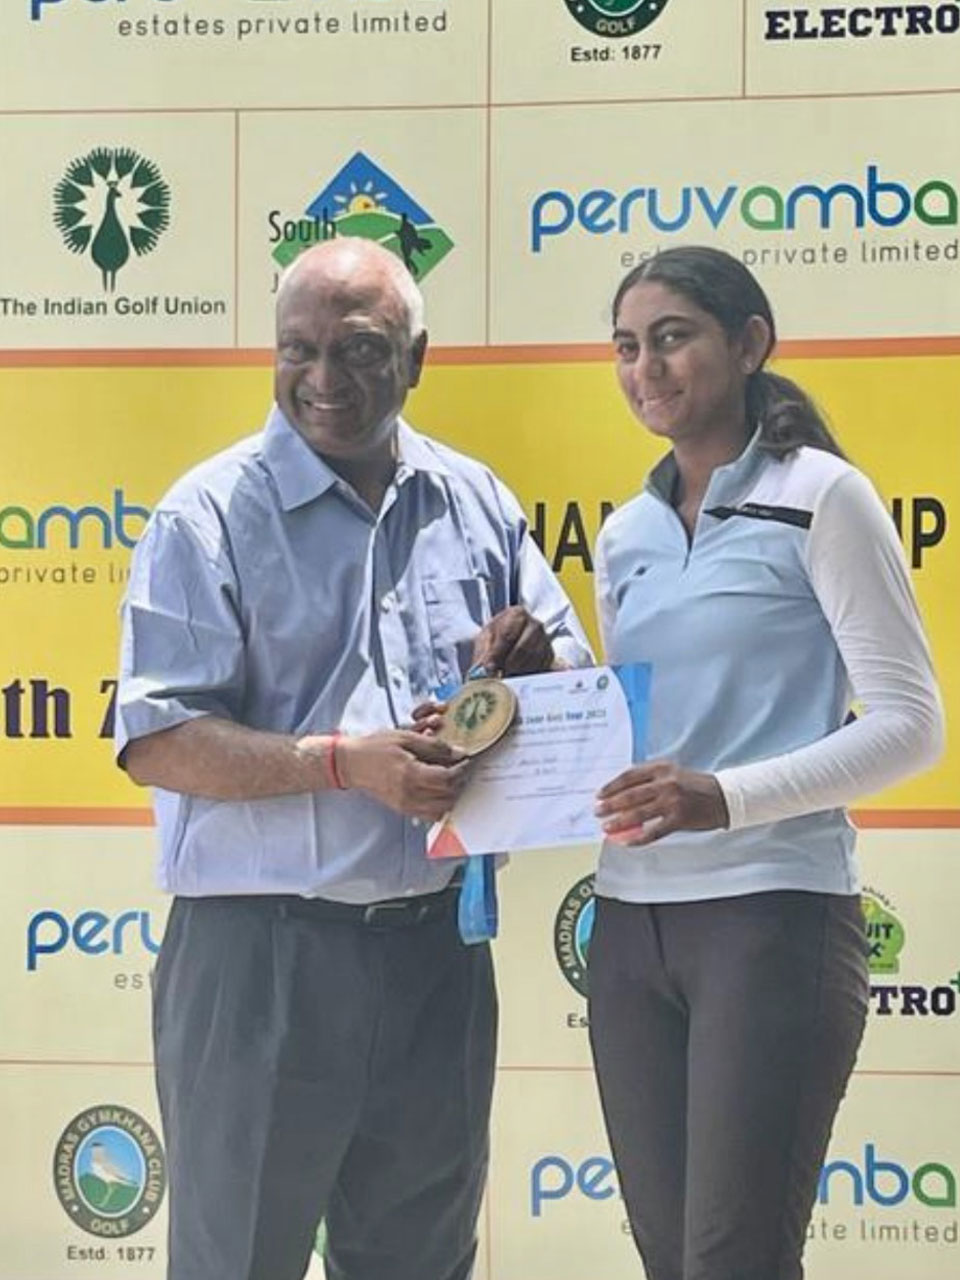 Anika Vivek finished 2nd in Category B Girls